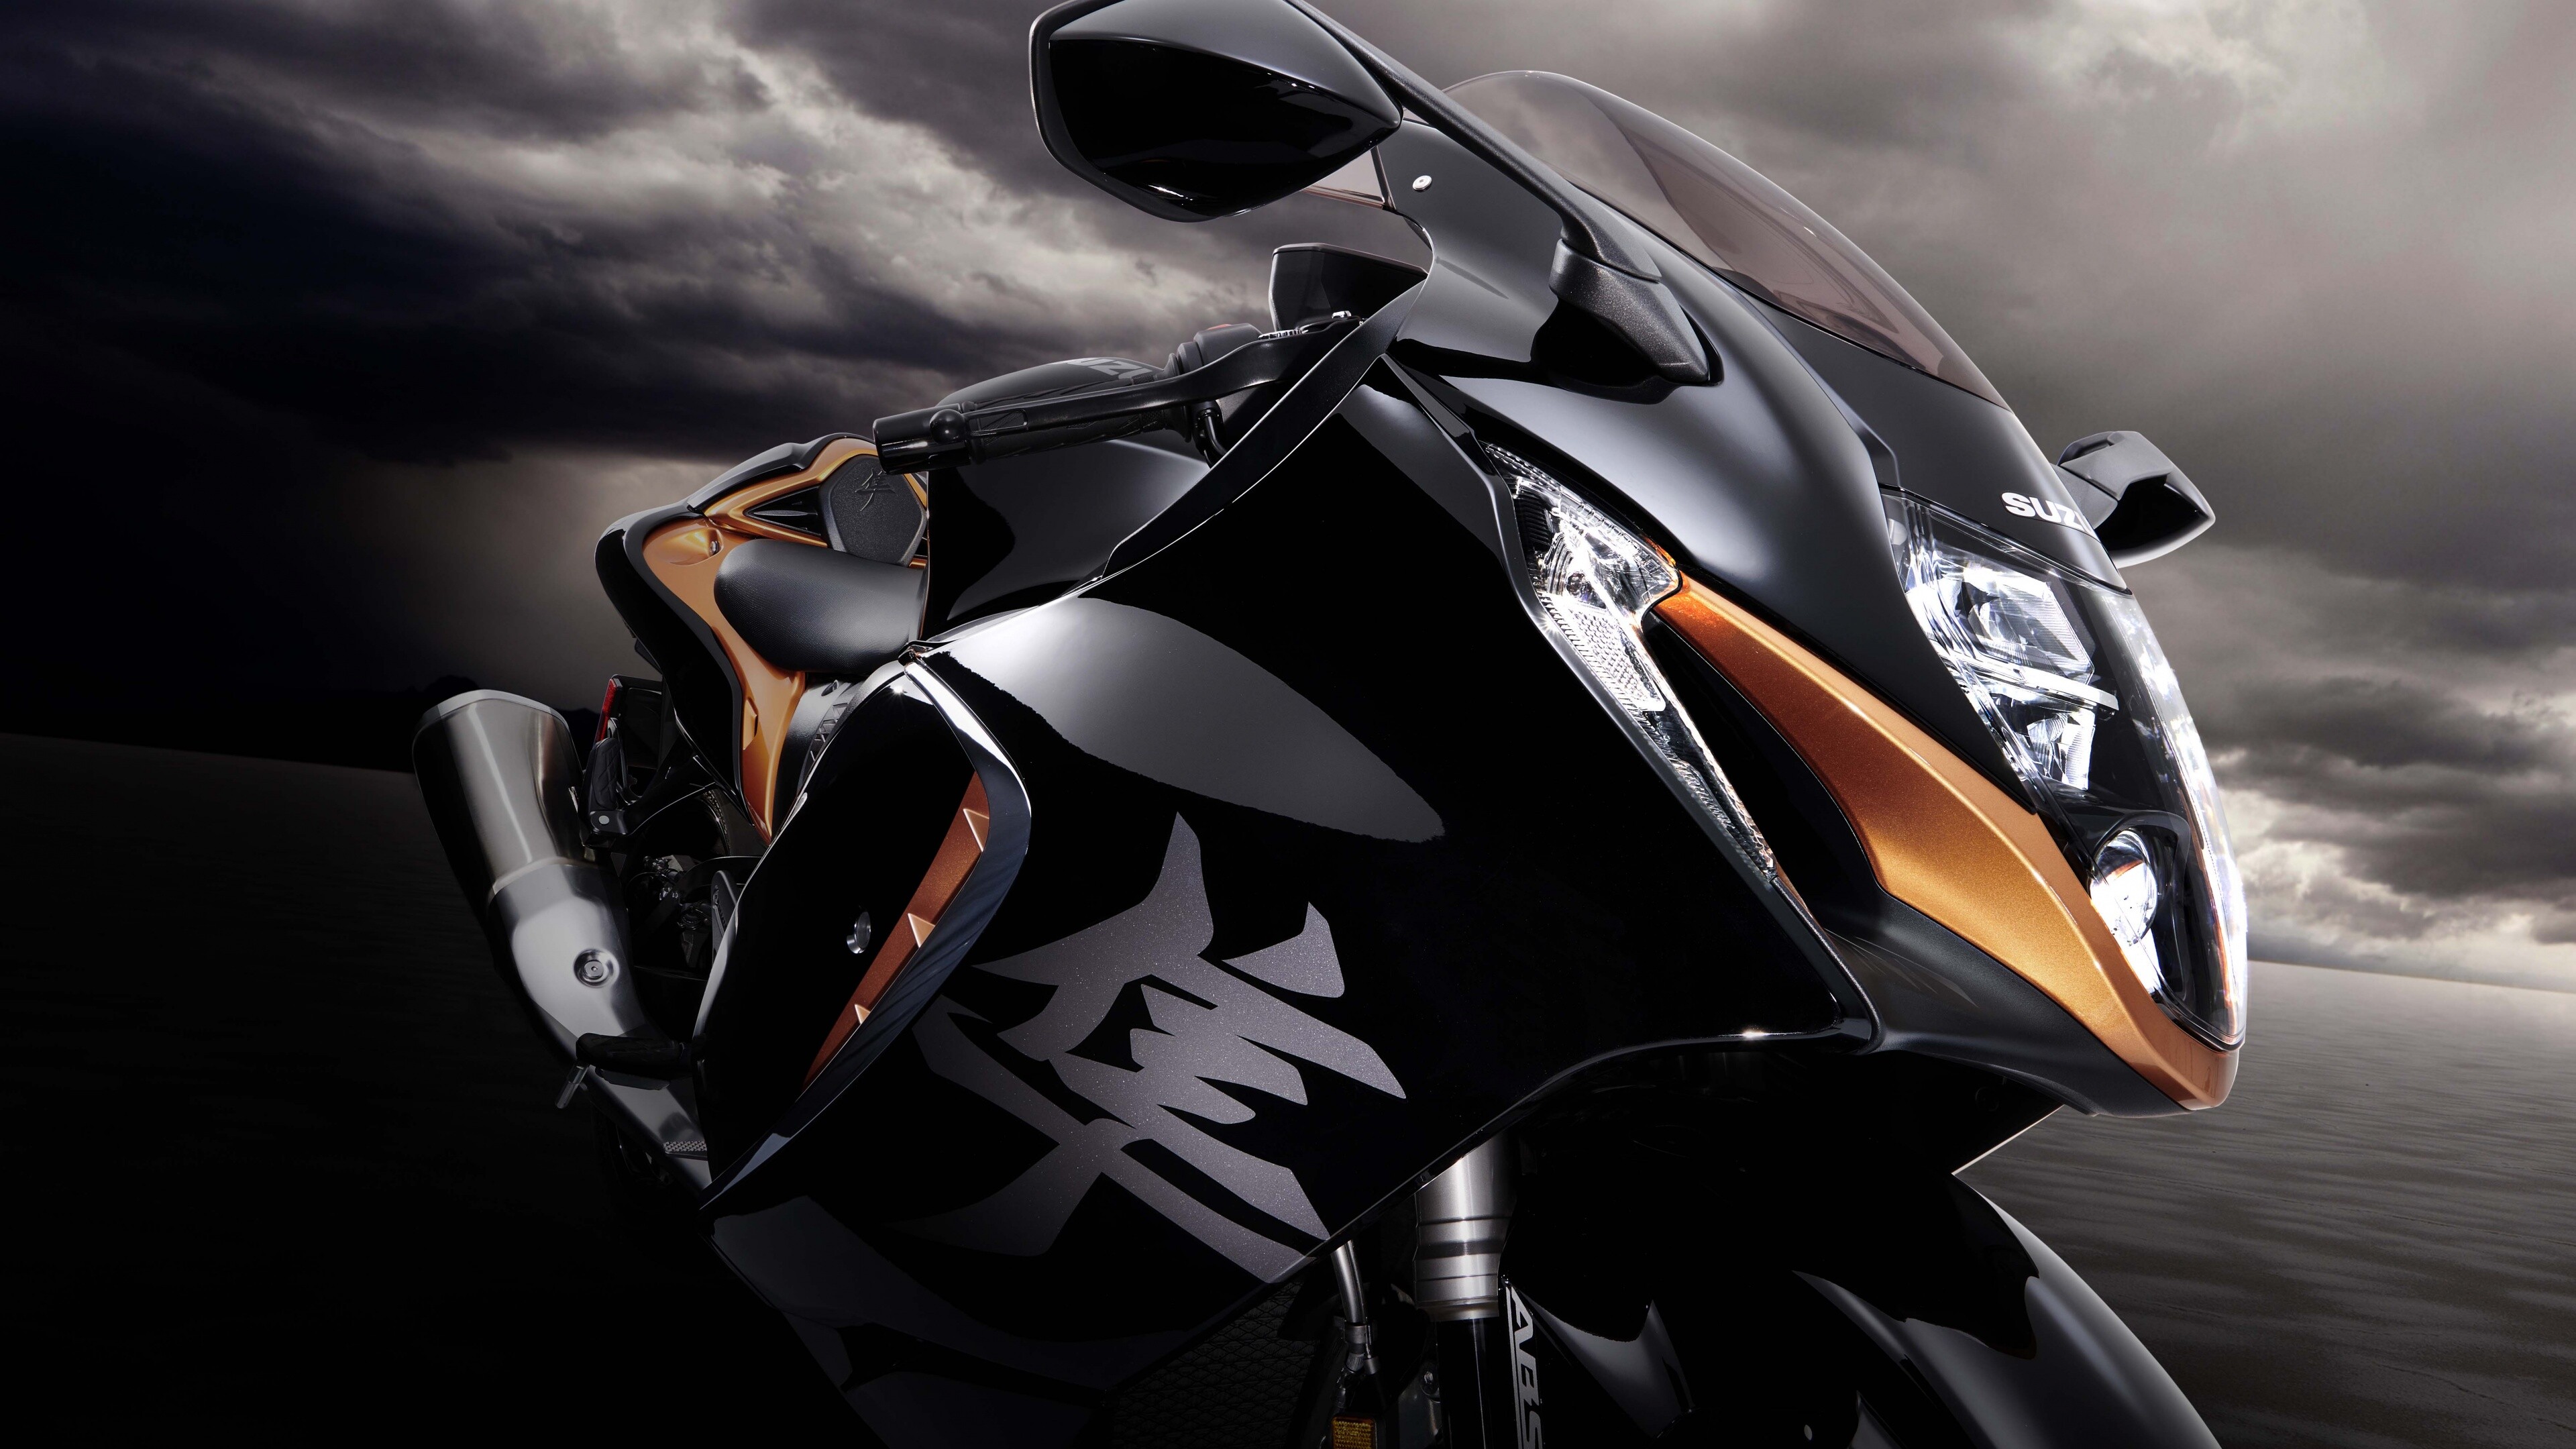 Suzuki Hayabusa: The world's fastest production motorcycle, with a top speed of 303 to 312 km/h. 3840x2160 4K Background.